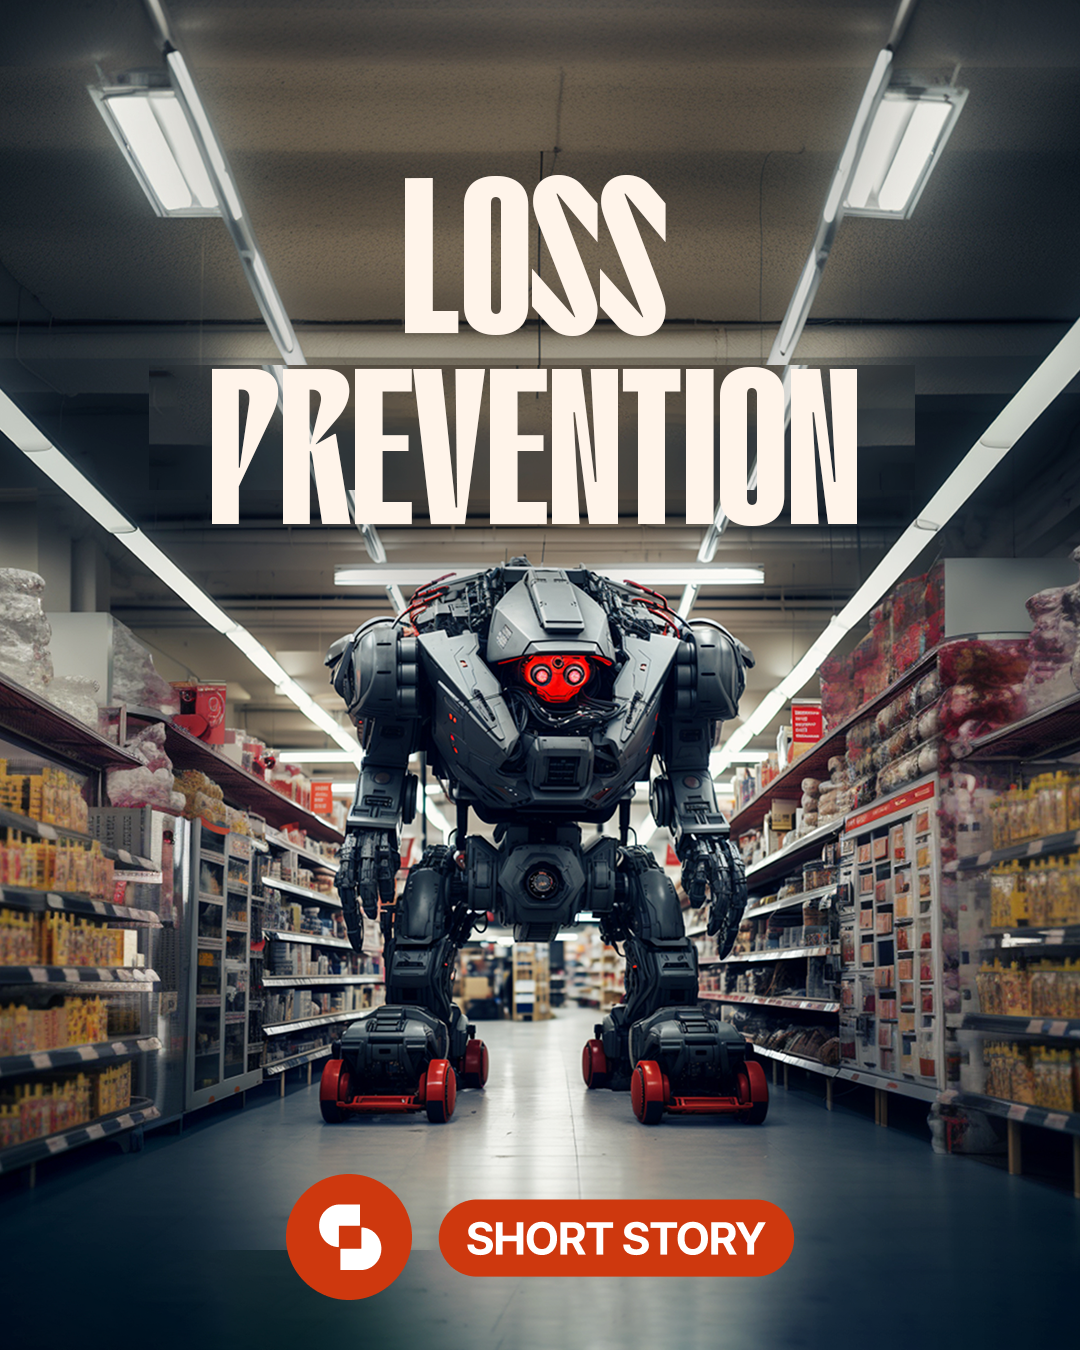 Loss Prevention story poster